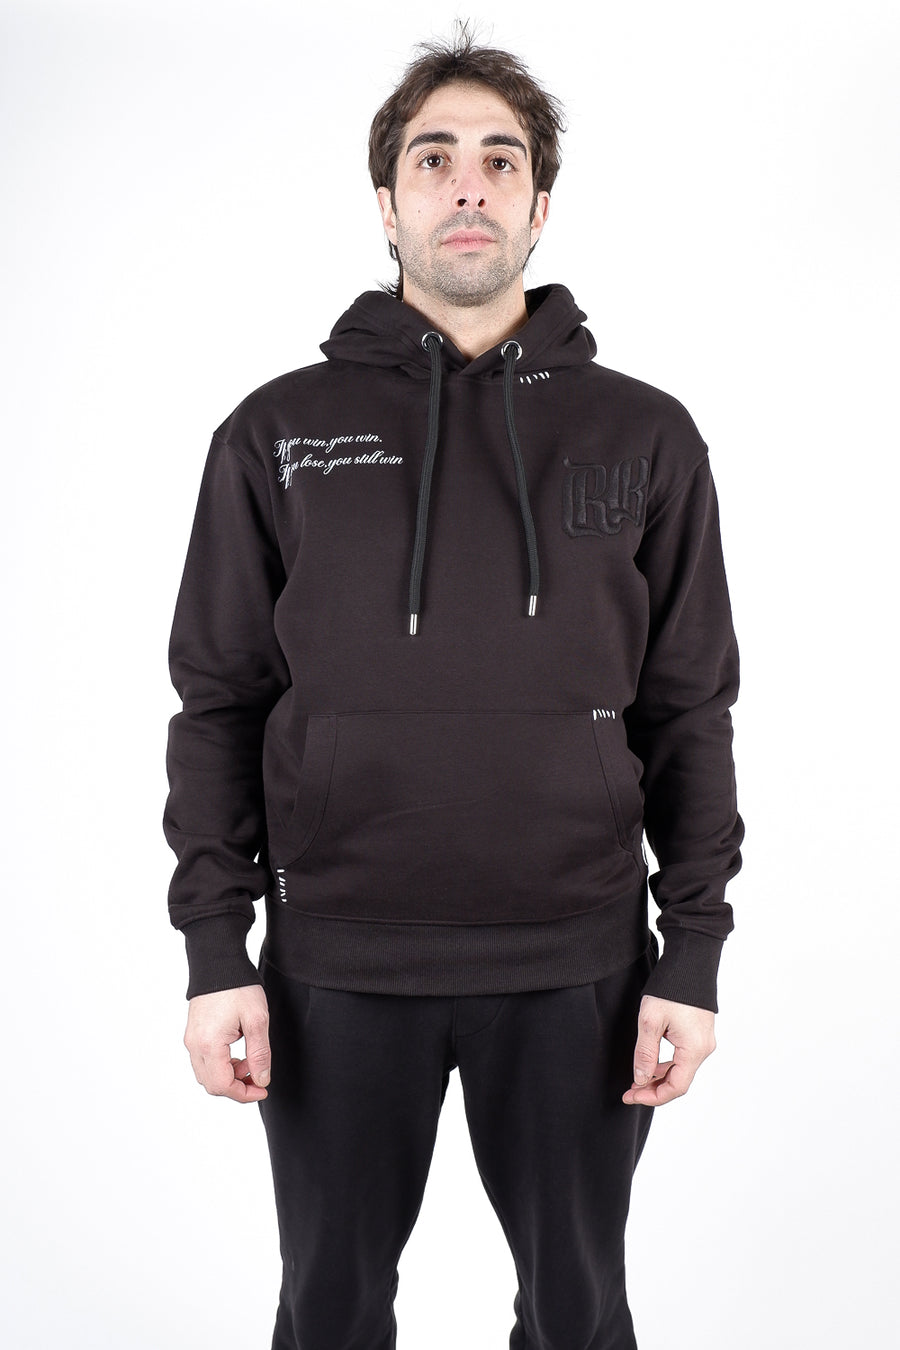 Buy the ABE Raging Bull Hoodie Black at Intro. Spend £50 for free UK delivery. Official stockists. We ship worldwide.